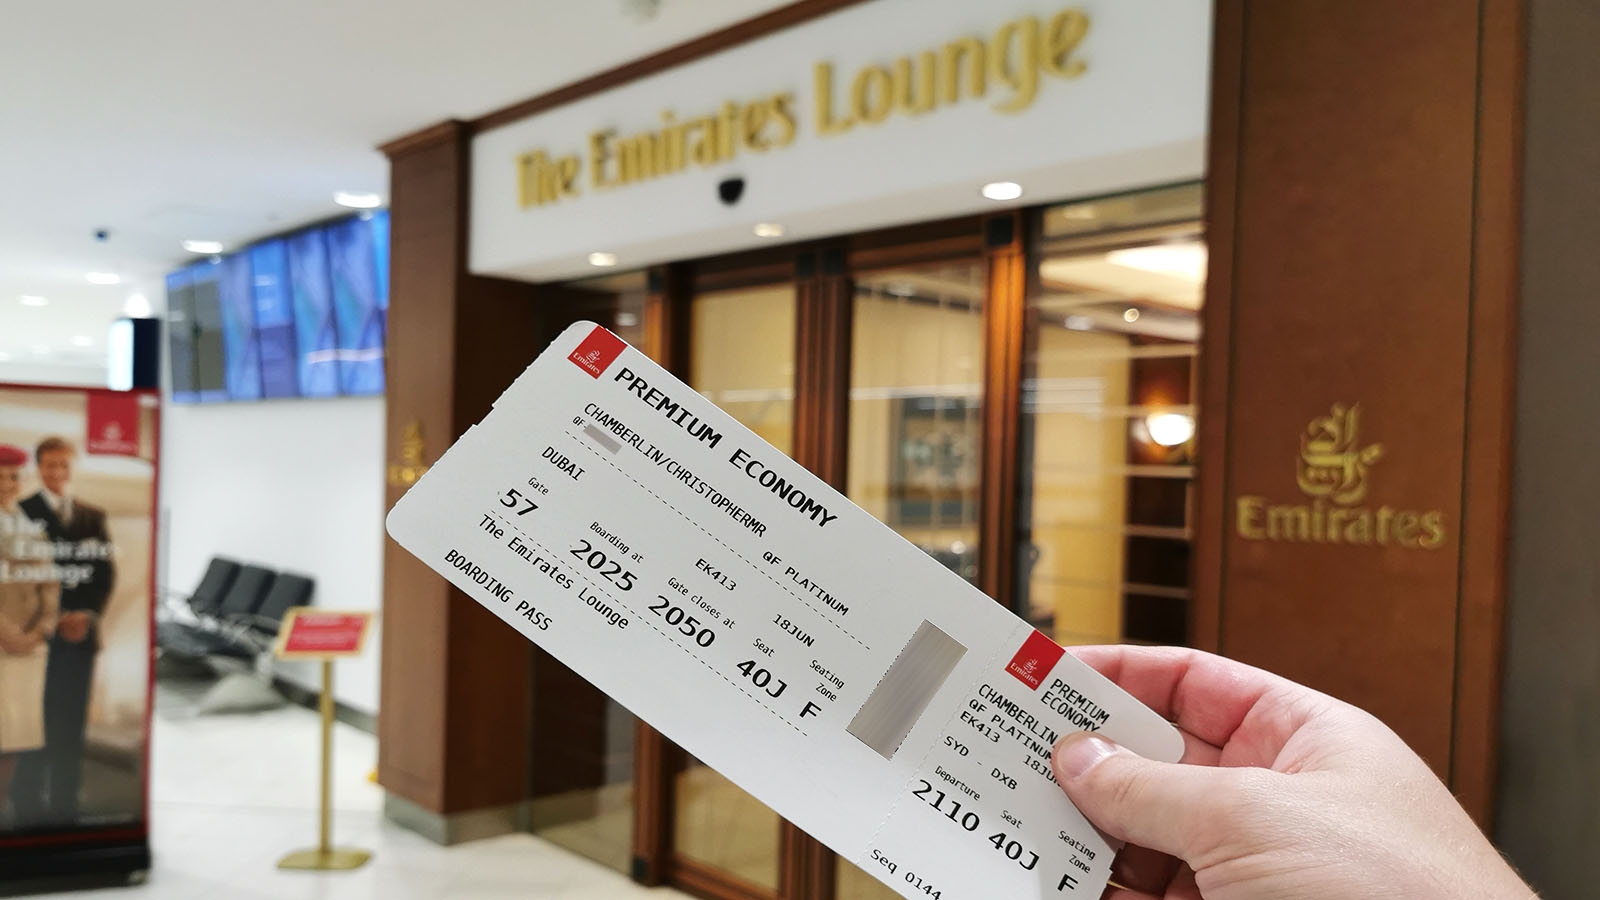 Boarding pass for Emirates, outside the airline's lounge in Sydney